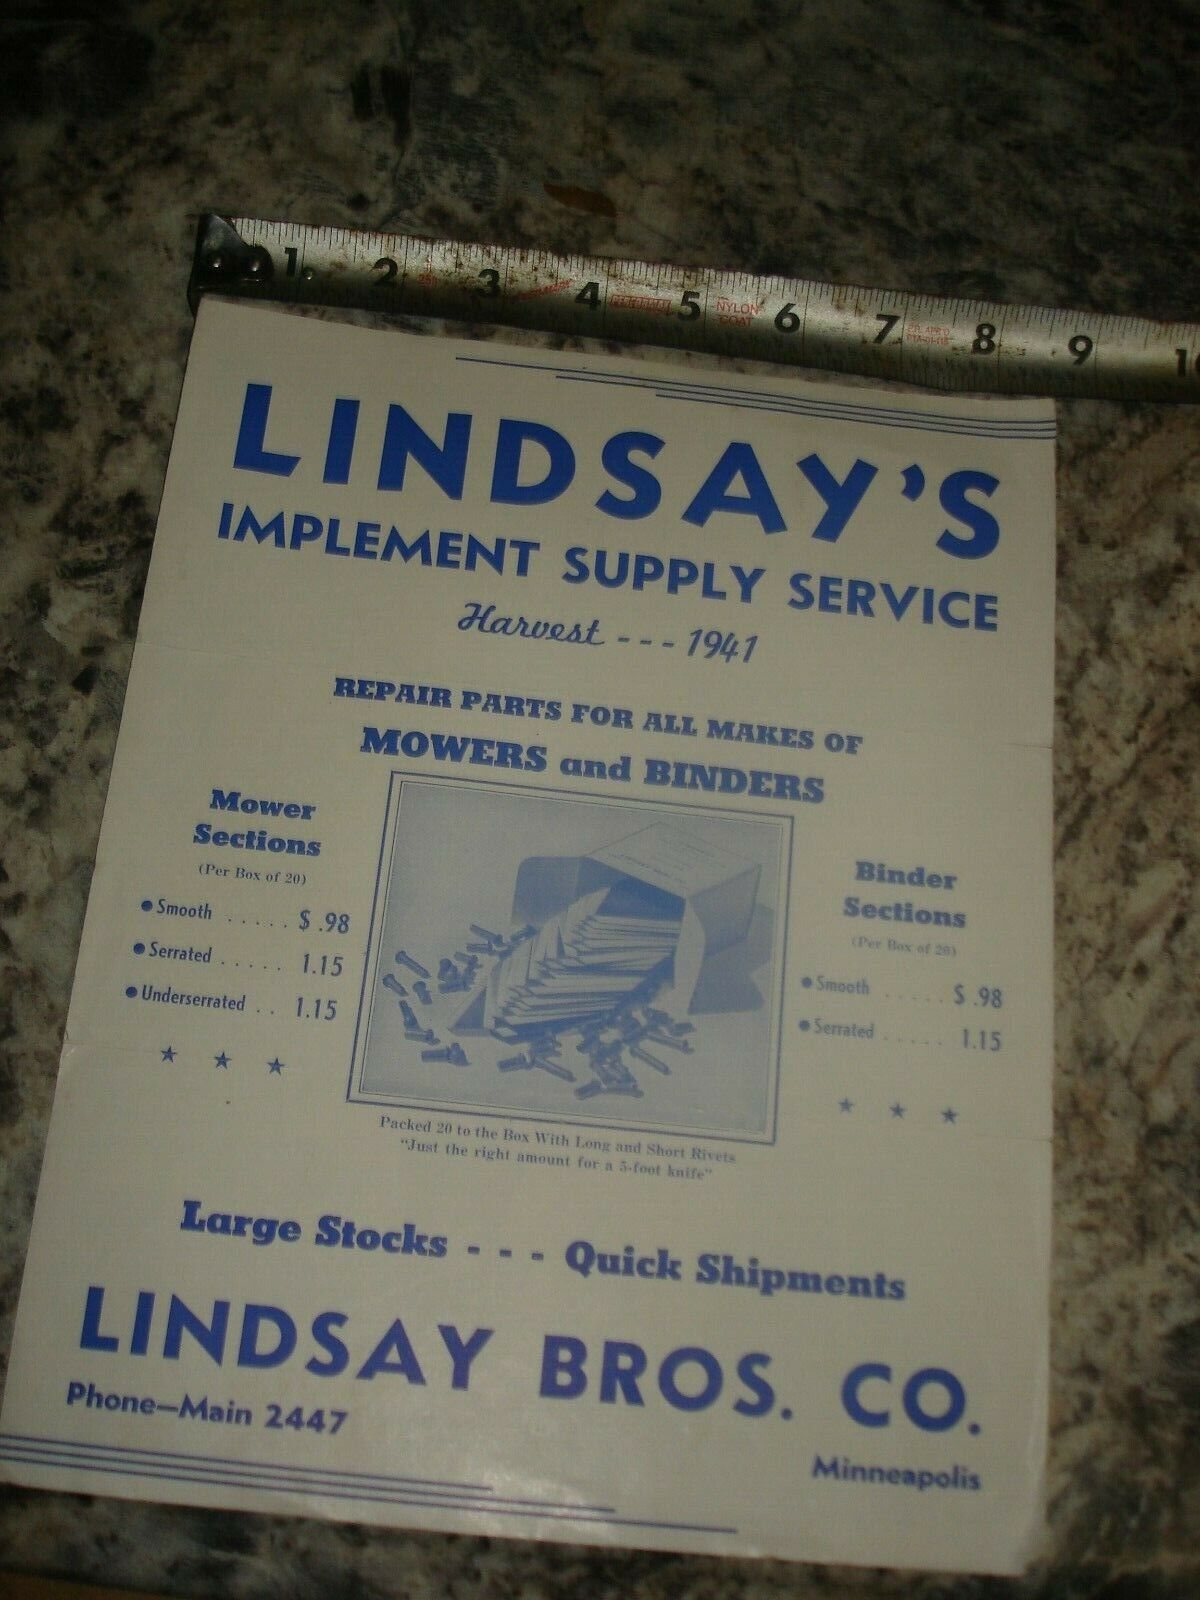 Vintage Lindsay's implement supply service tools    ad brochure Old antique 